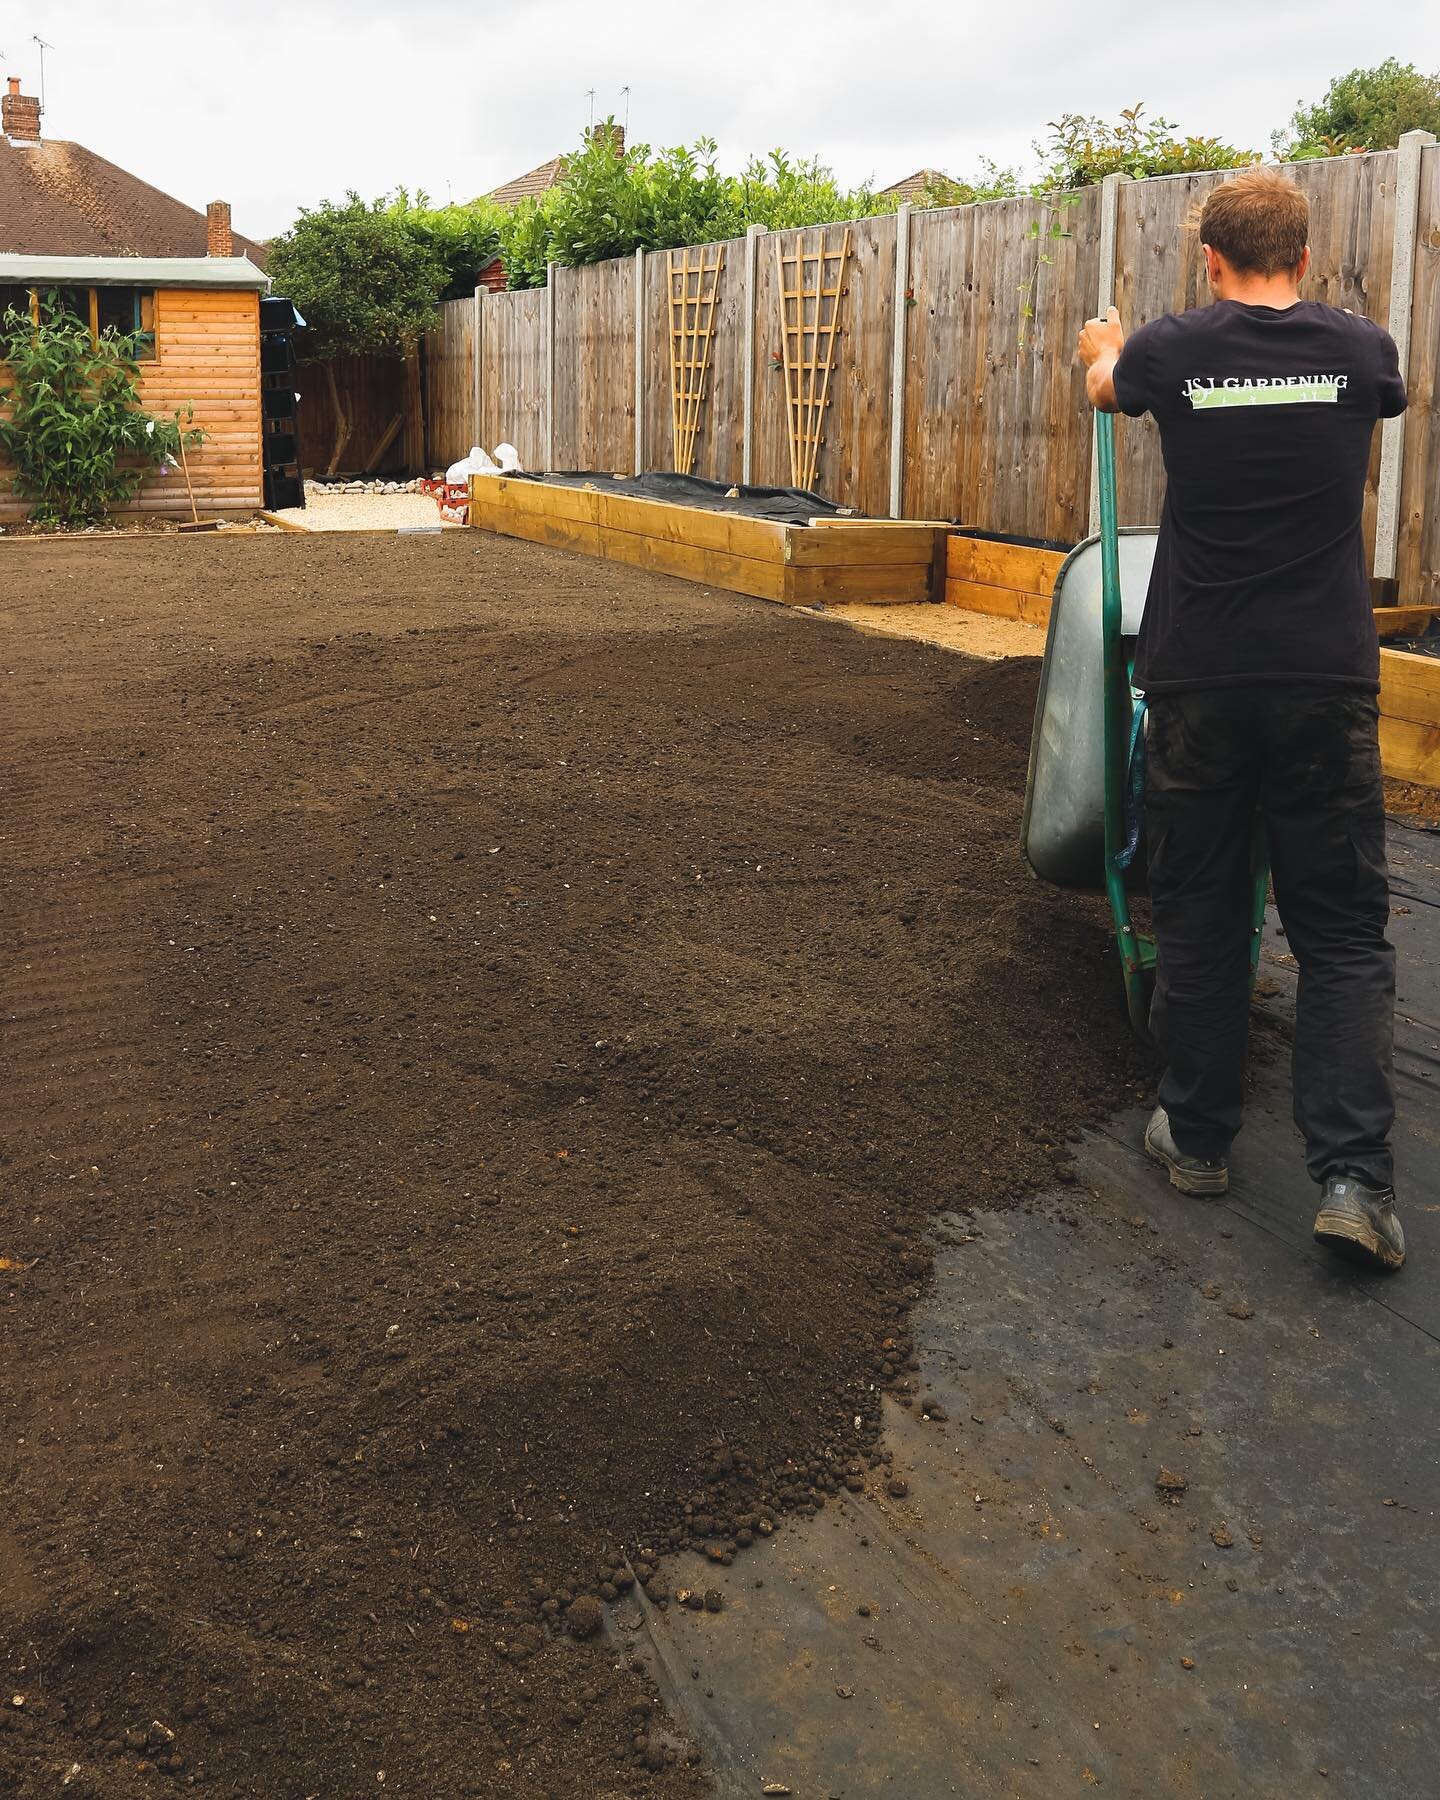 14 tonnes of grade A topsoil shifted ready for the new lawn

For any questions you have or if you wish to organise a quote with us please feel free to contact directly on 07450272704/jsjgardening@gmail.com or drop me a message on here.
.
.
#gardener 